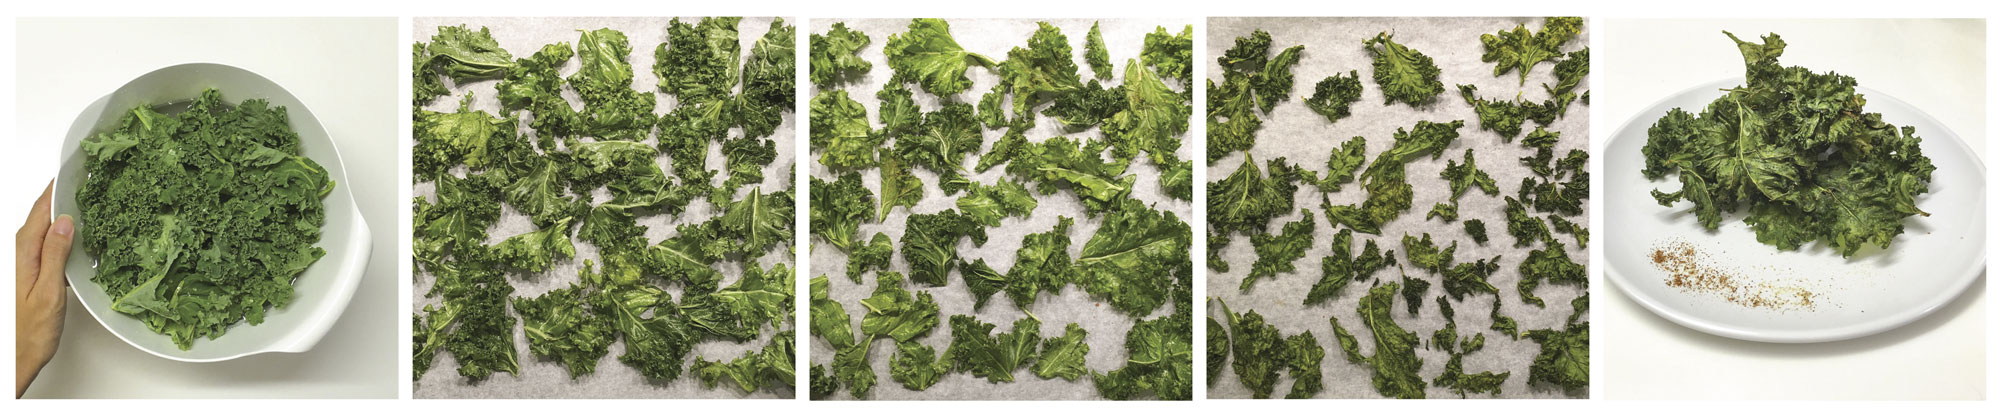 Steps to making kale chips, with washing and using oven and serving